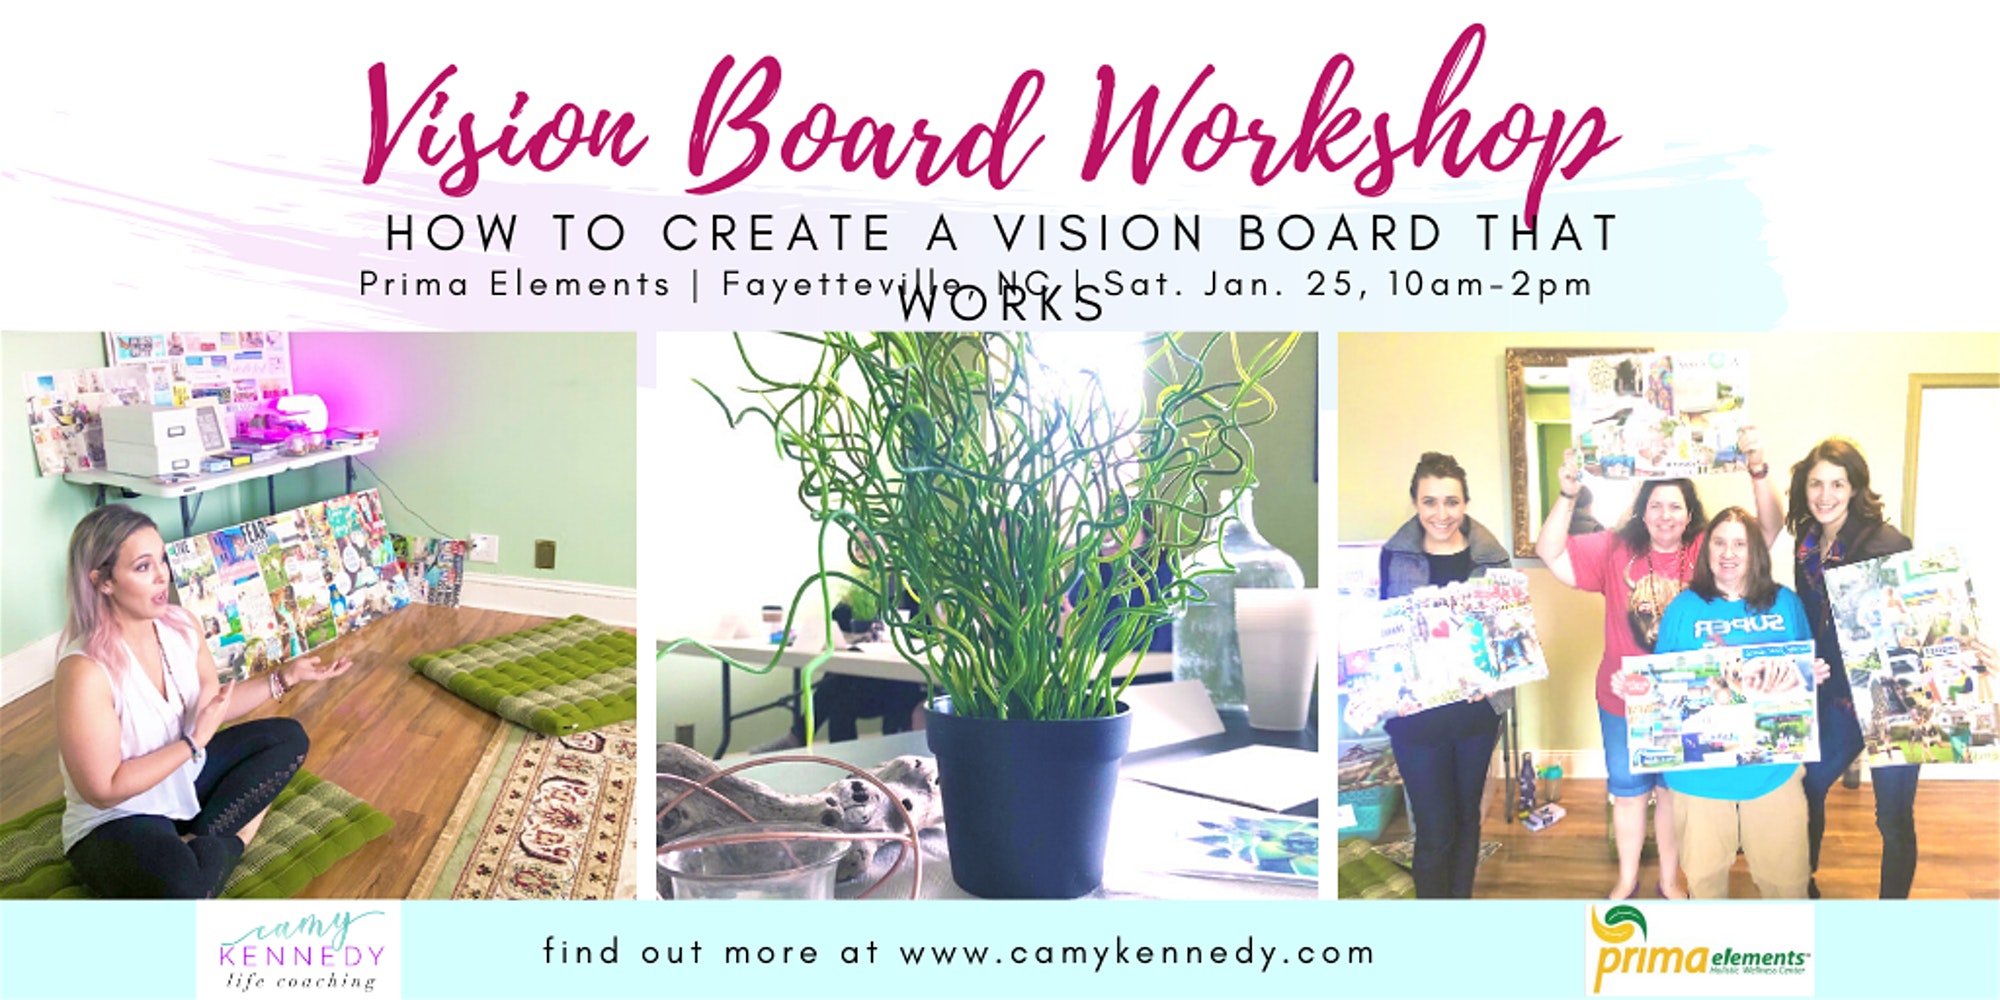 How to Create a Vision Board that Works